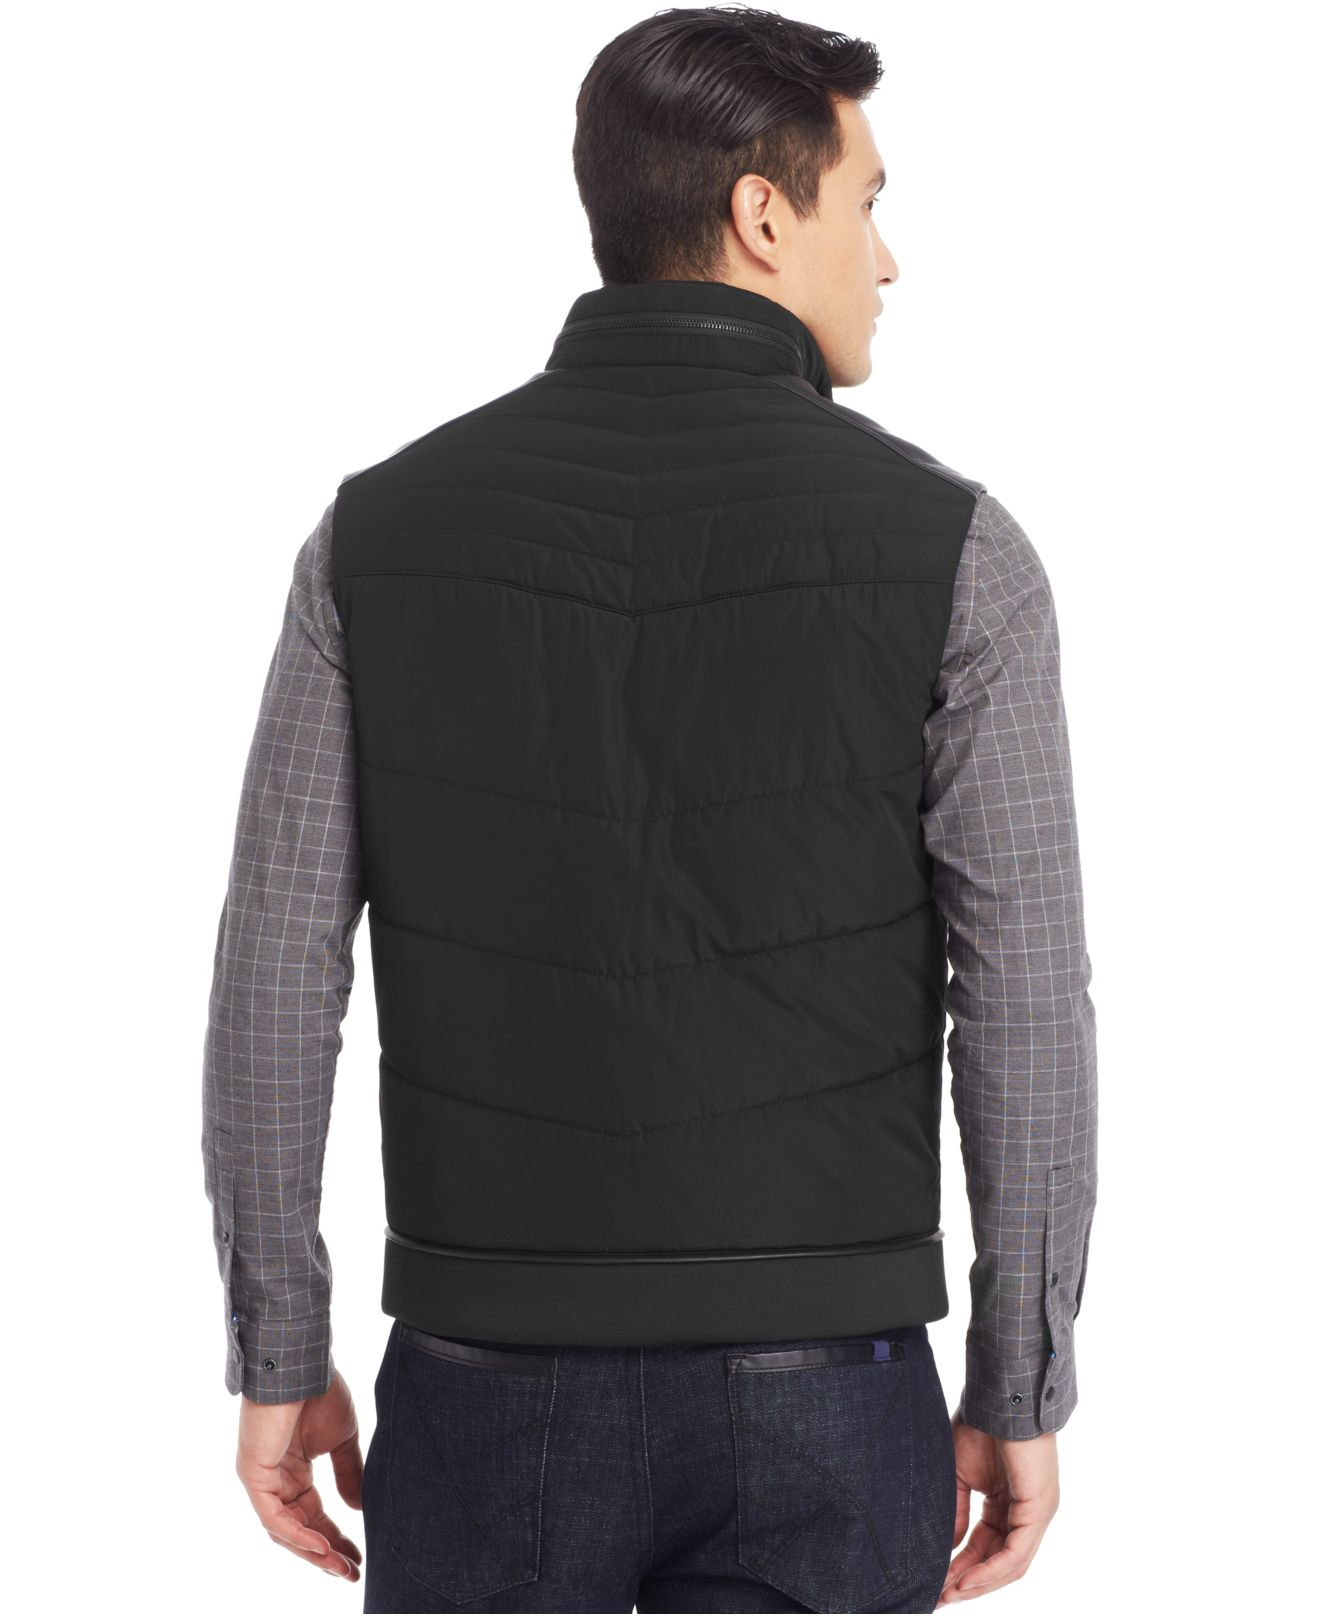 Lyst - Kenneth Cole Reaction Cire Faux-leather Puffer Vest in Black for Men